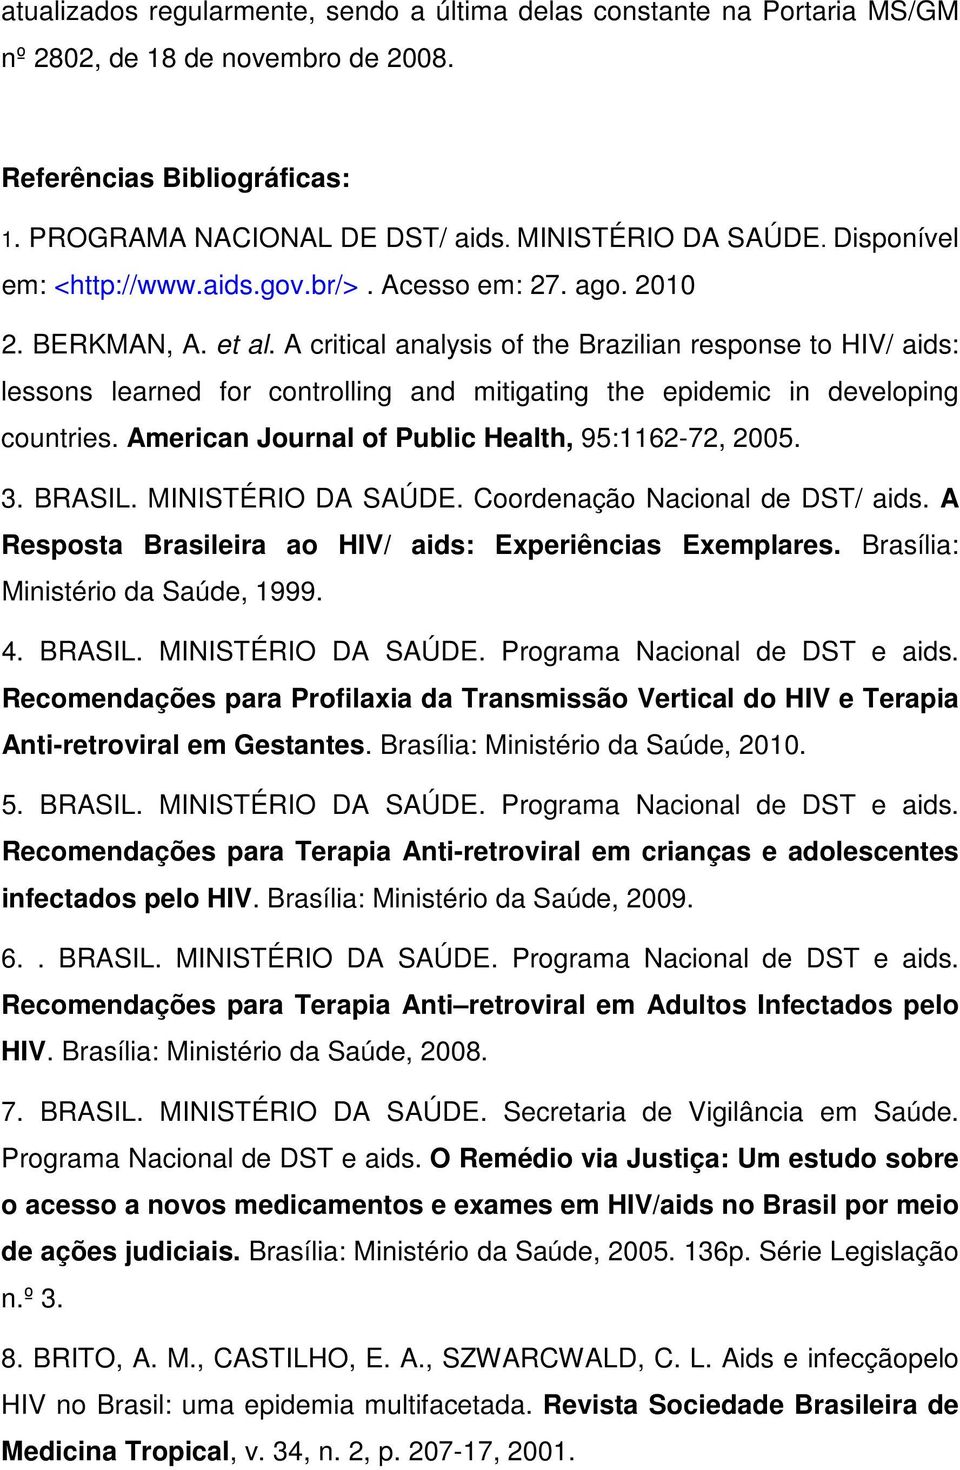 A critical analysis of the Brazilian response to HIV/ aids: lessons learned for controlling and mitigating the epidemic in developing countries. American Journal of Public Health, 95:1162-72, 2005. 3.